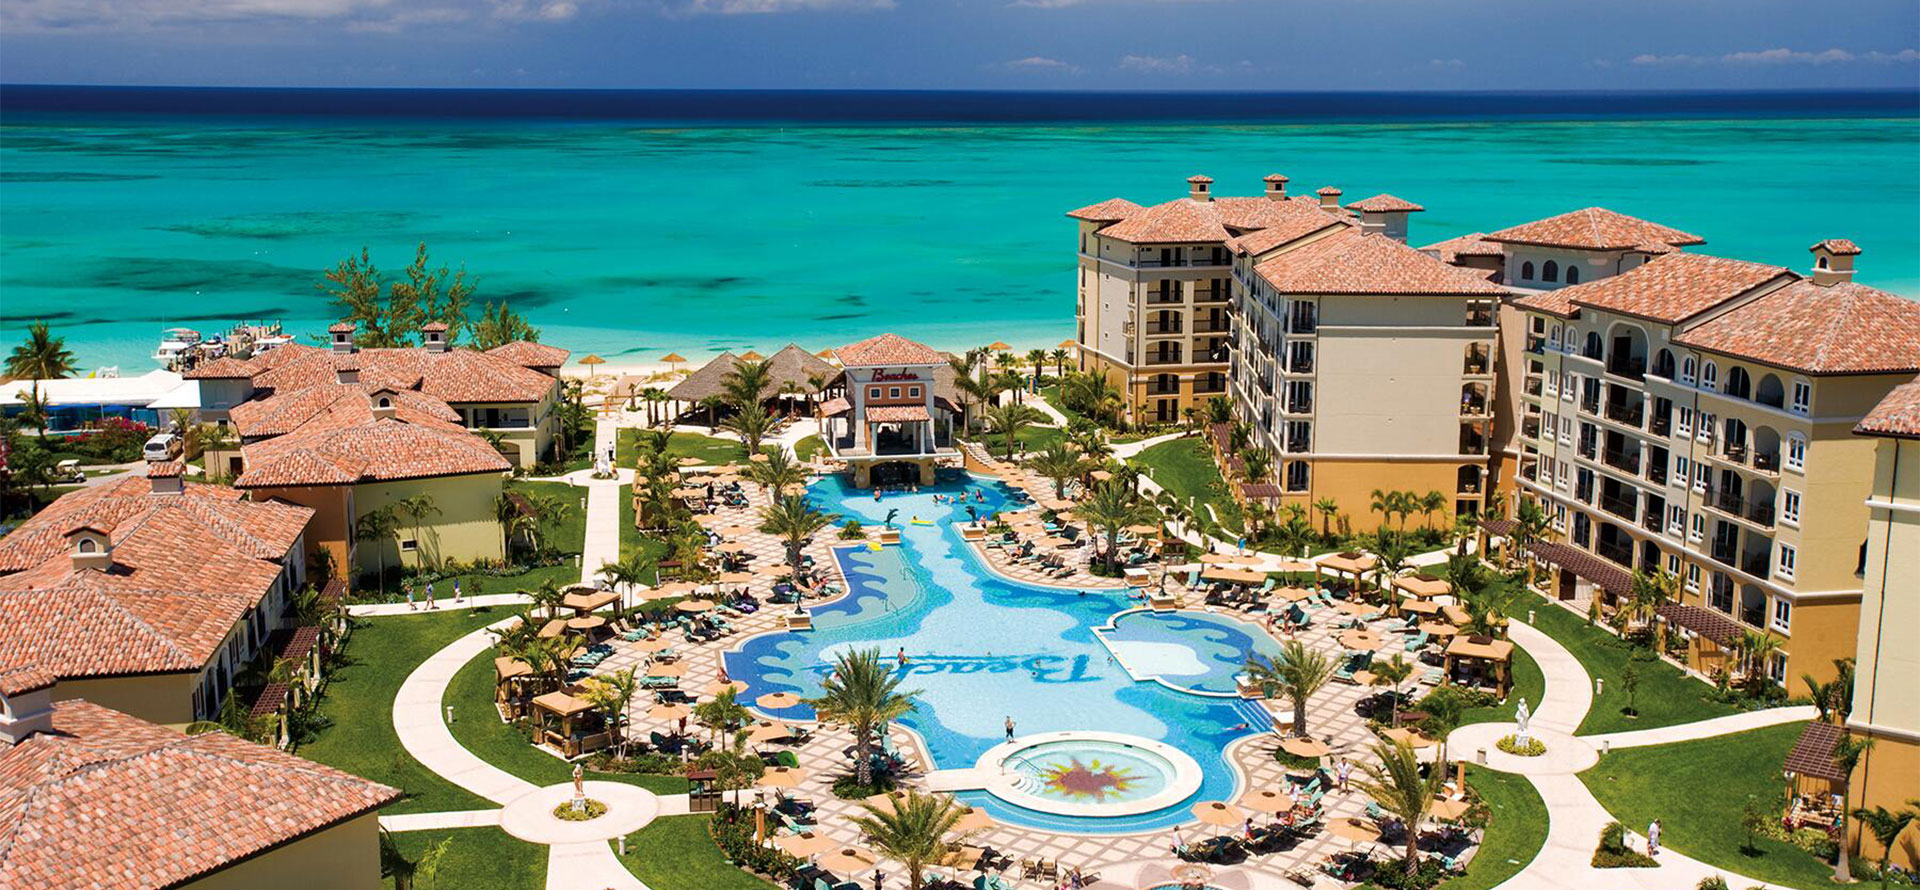 Top view of Turks and Caicos all-inclusive adults only resort.